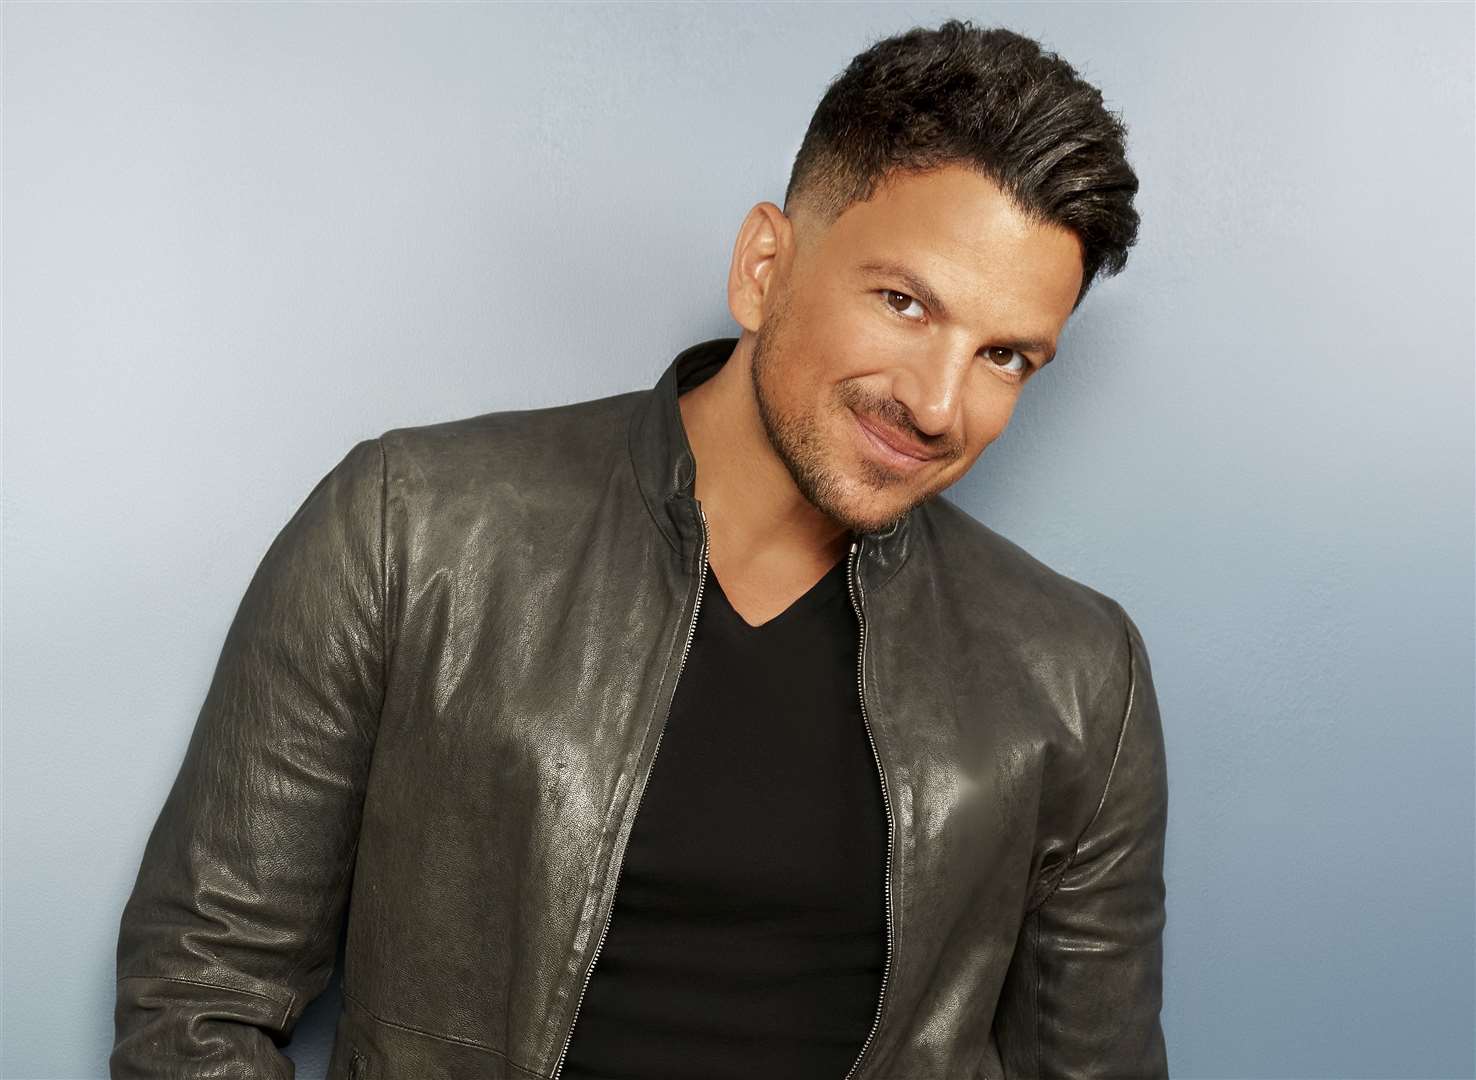 Pop singer Peter Andre will perform at this year's Revival in the Park